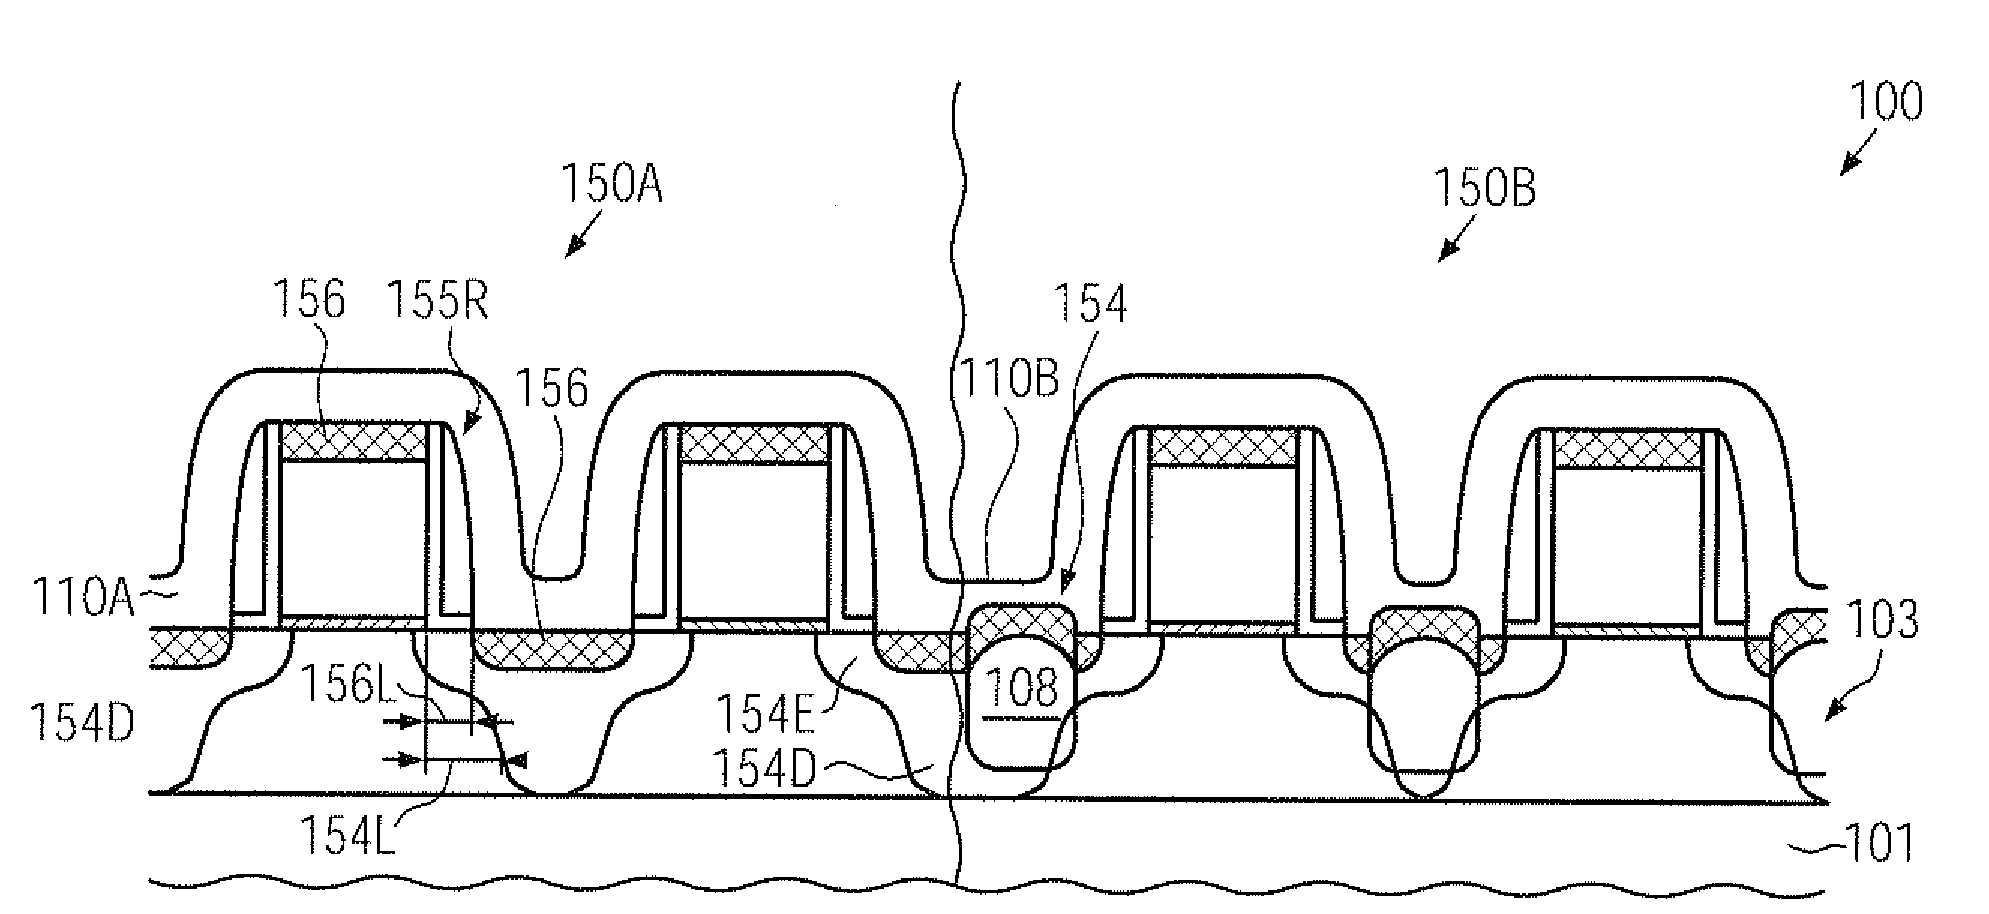 CMOS device comprising nmos transistors and pmos transistors having increased strain-inducing sources and closely spaced metal silicide regions